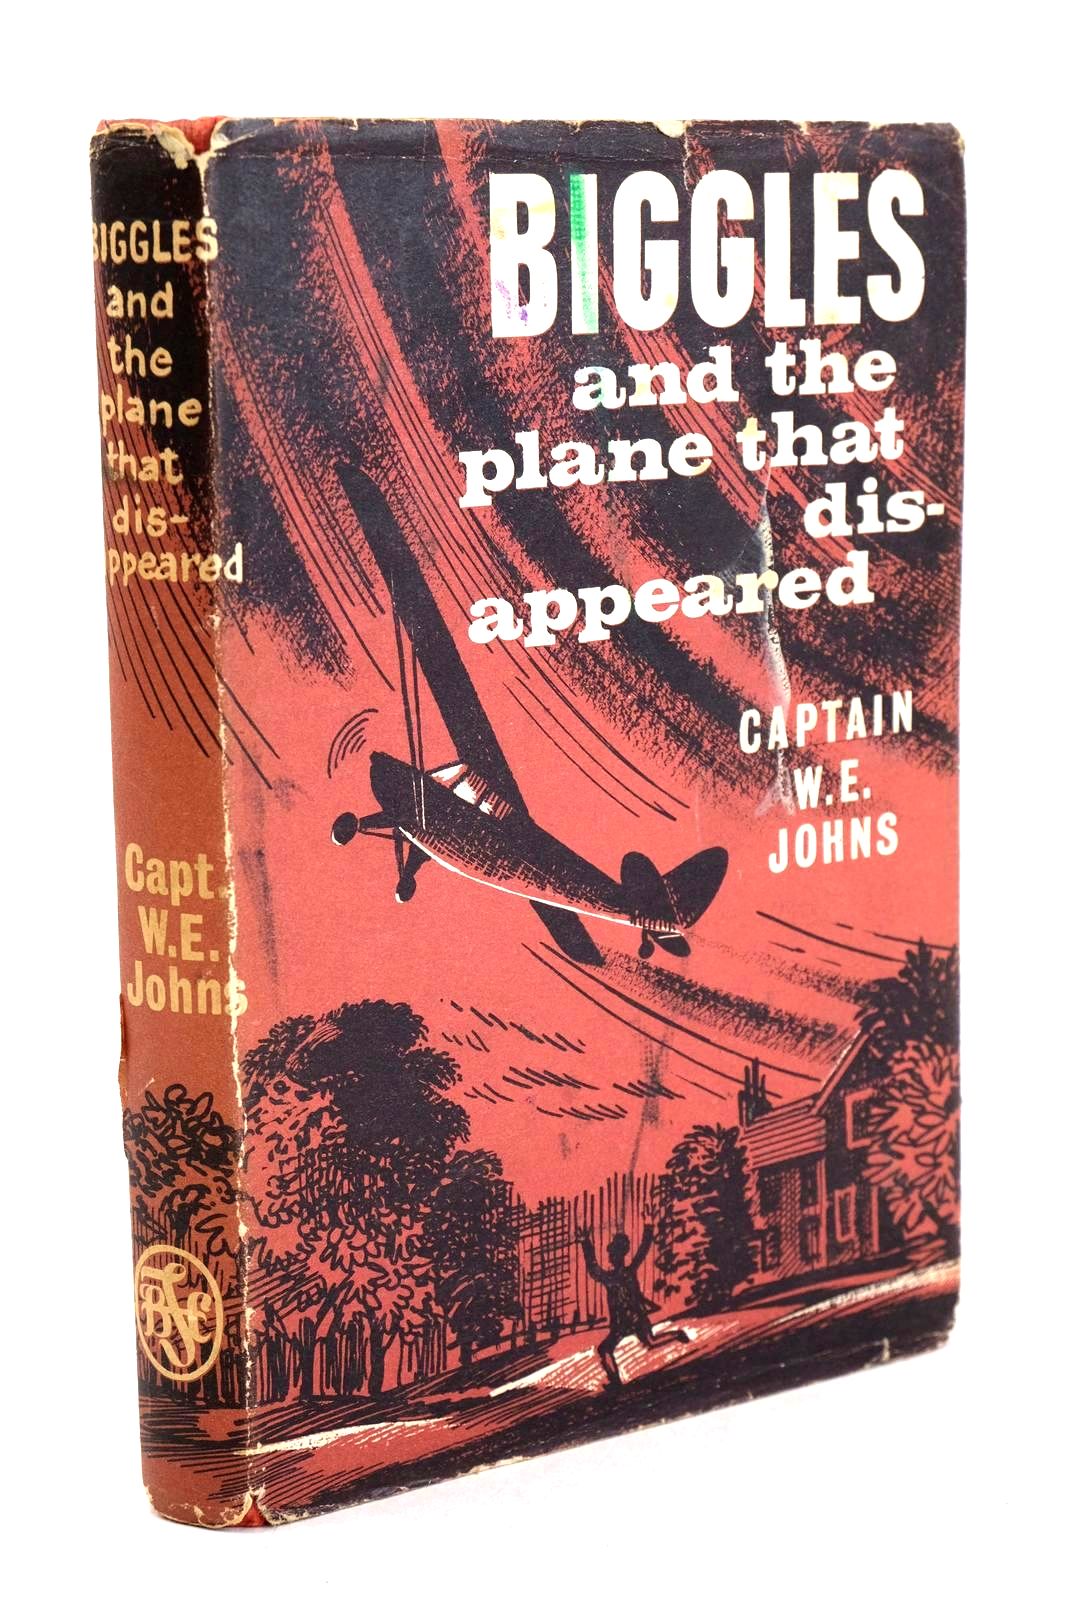 Photo of BIGGLES AND THE PLANE THAT DISAPPEARED written by Johns, W.E. illustrated by Stead,  published by The Children's Book Club (STOCK CODE: 1326638)  for sale by Stella & Rose's Books